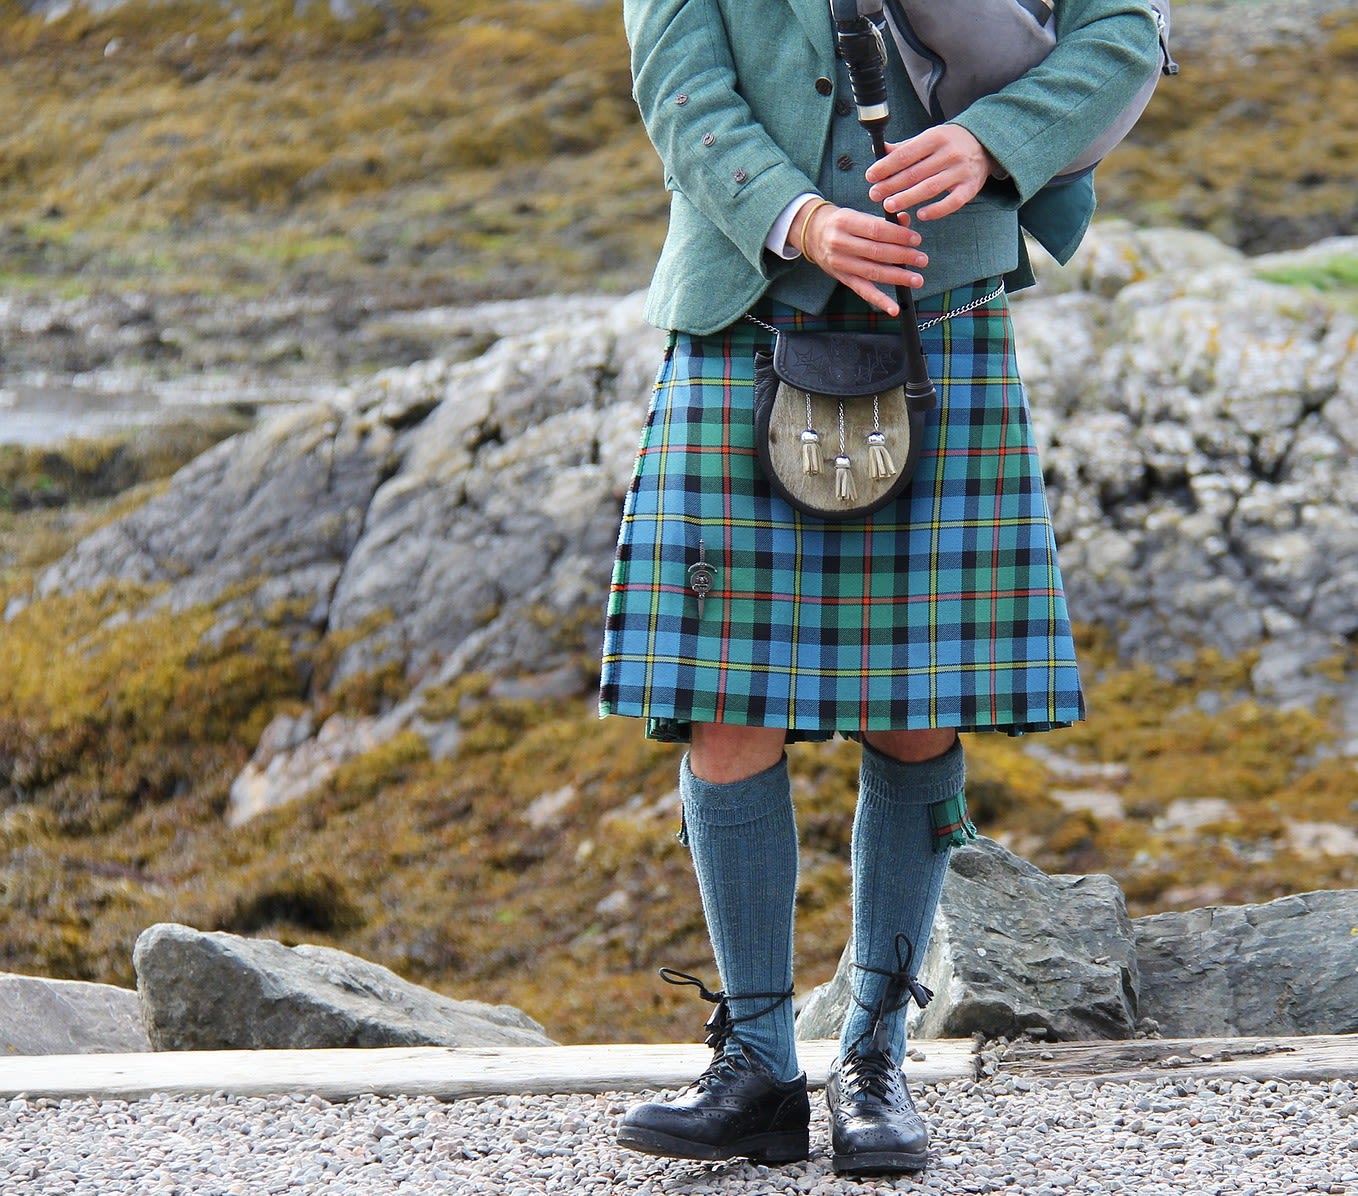 Authentic Scottish Kilts, Tartans, & Accessories | Claymore Imports